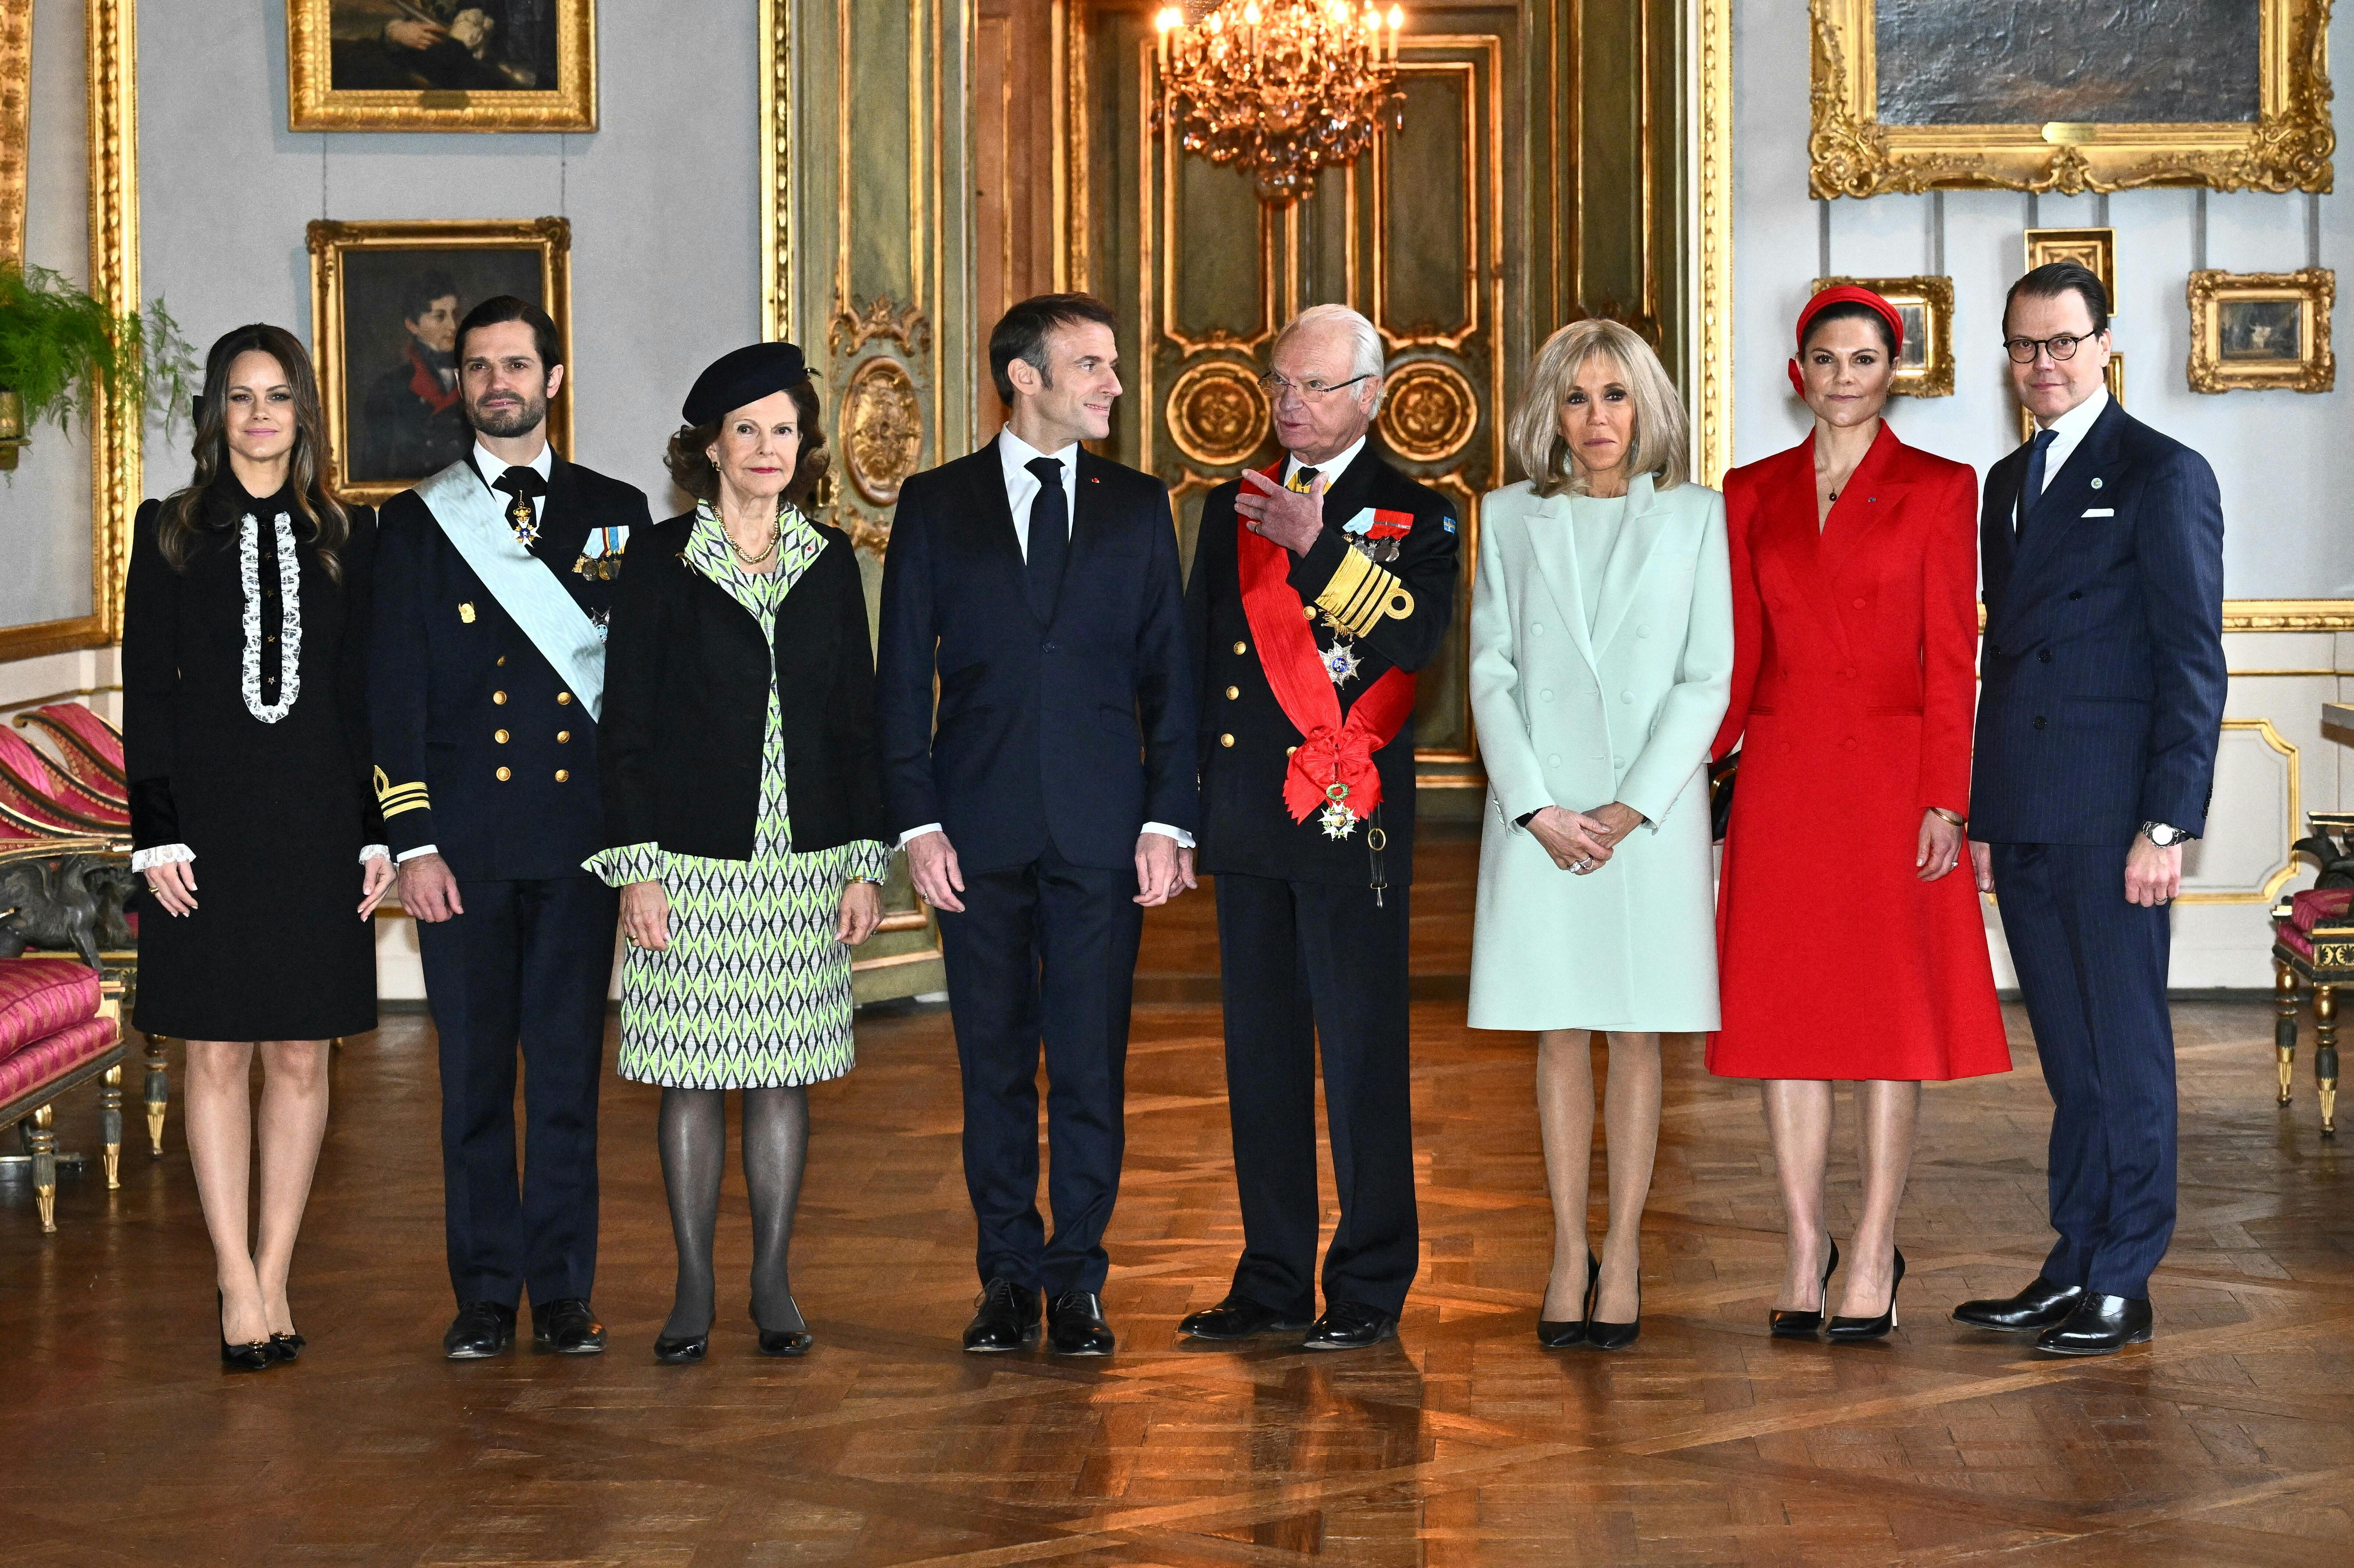 Sweden's Princess Sofia, Prince Carl Philip, Queen Silvia, King Carl XVI Gustaf, Crown Princess Victoria and Prince Daniel, and French President Emmanuel Macron and his wife Brigitte Macron, pose for a photograph in Lovisa Ulrika's dining room at the Royal Palace in Stockholm, Sweden, on January 30, 2024. Claudio Bresciani/TT News Agency/via REUTERS ATTENTION EDITORS - THIS IMAGE WAS PROVIDED BY A THIRD PARTY. SWEDEN OUT.NO COMMERCIAL OR EDITORIAL SALES IN SWEDEN.